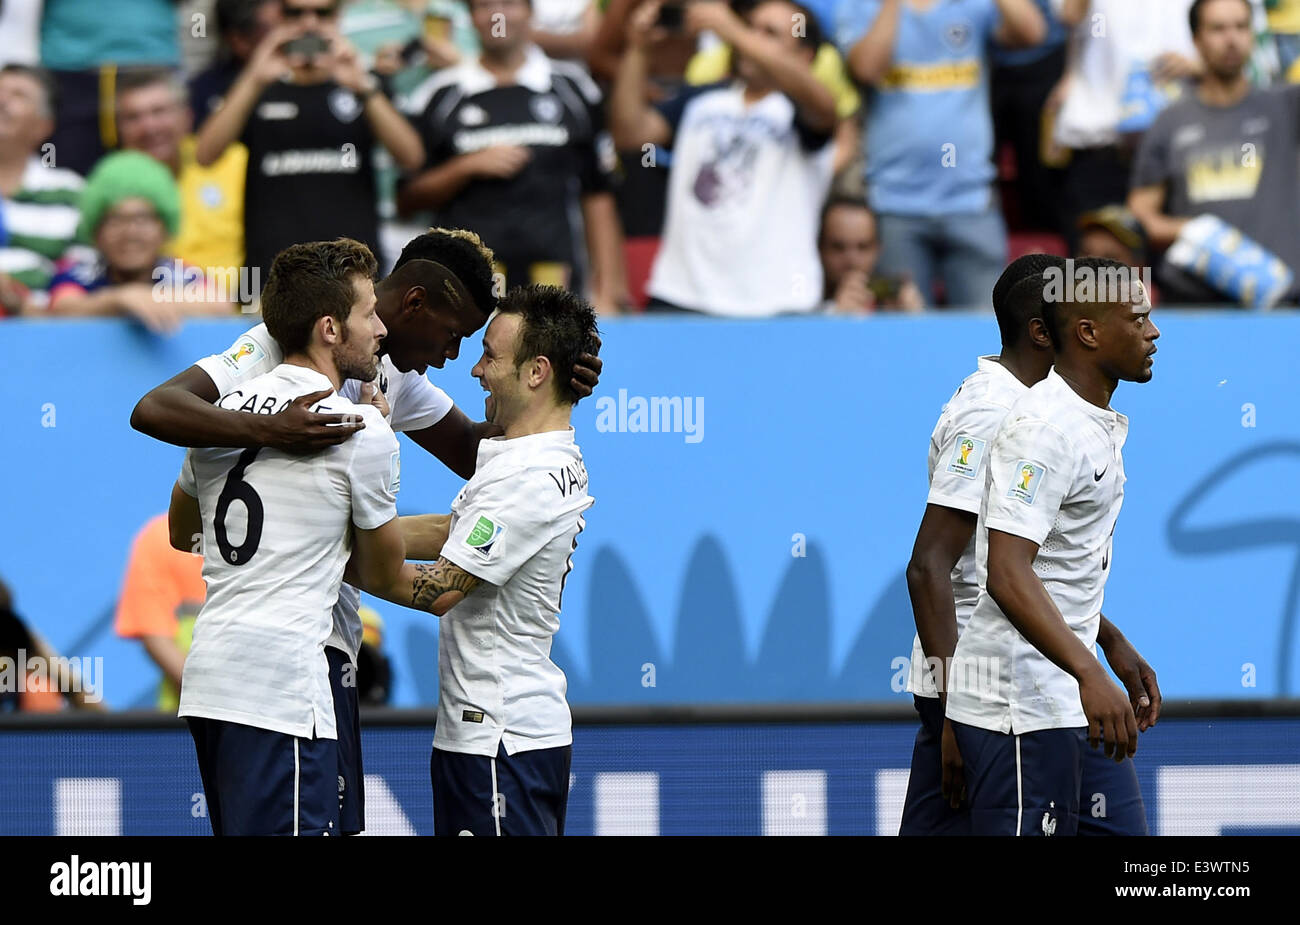 Brasilia, Brazil. 30th June, 2014. France's players celebrate the goal during a Round of 16 match between France and Nigeria of 2014 FIFA World Cup at the Estadio Nacional Stadium in Brasilia, Brazil, on June 30, 2014. Credit:  Qi Heng/Xinhua/Alamy Live News Stock Photo